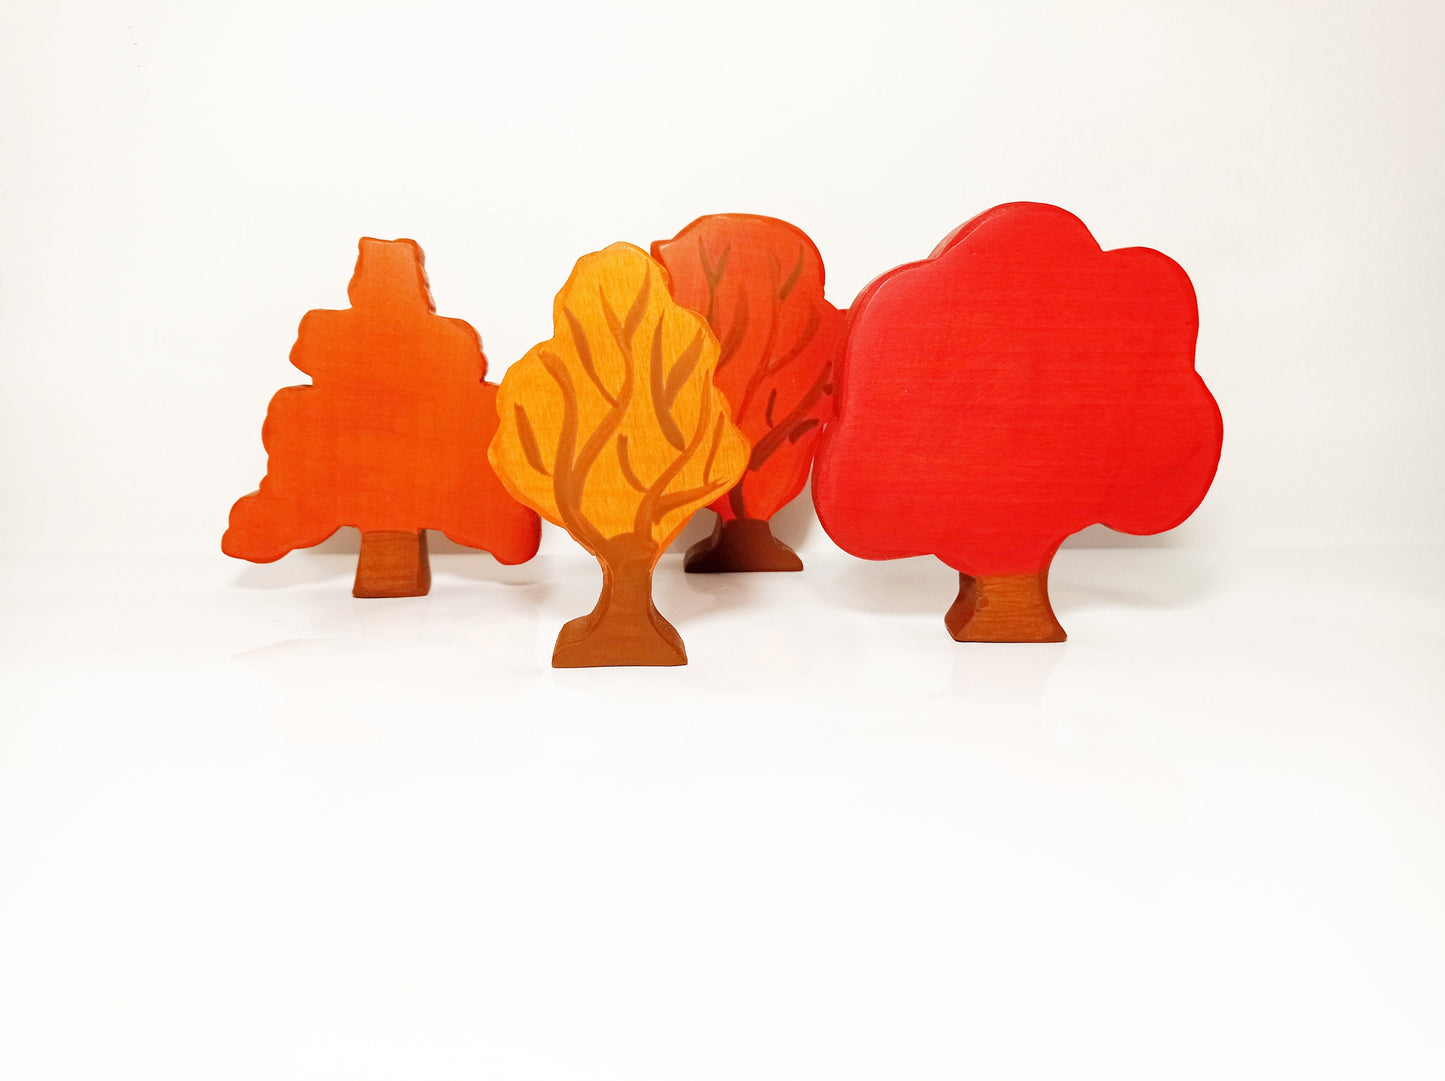 Wooden autumn tree set, wooden tree toy set, waldorf inspired wooden toys, gift for kids, seasonal table decoration, wooden forest toy set